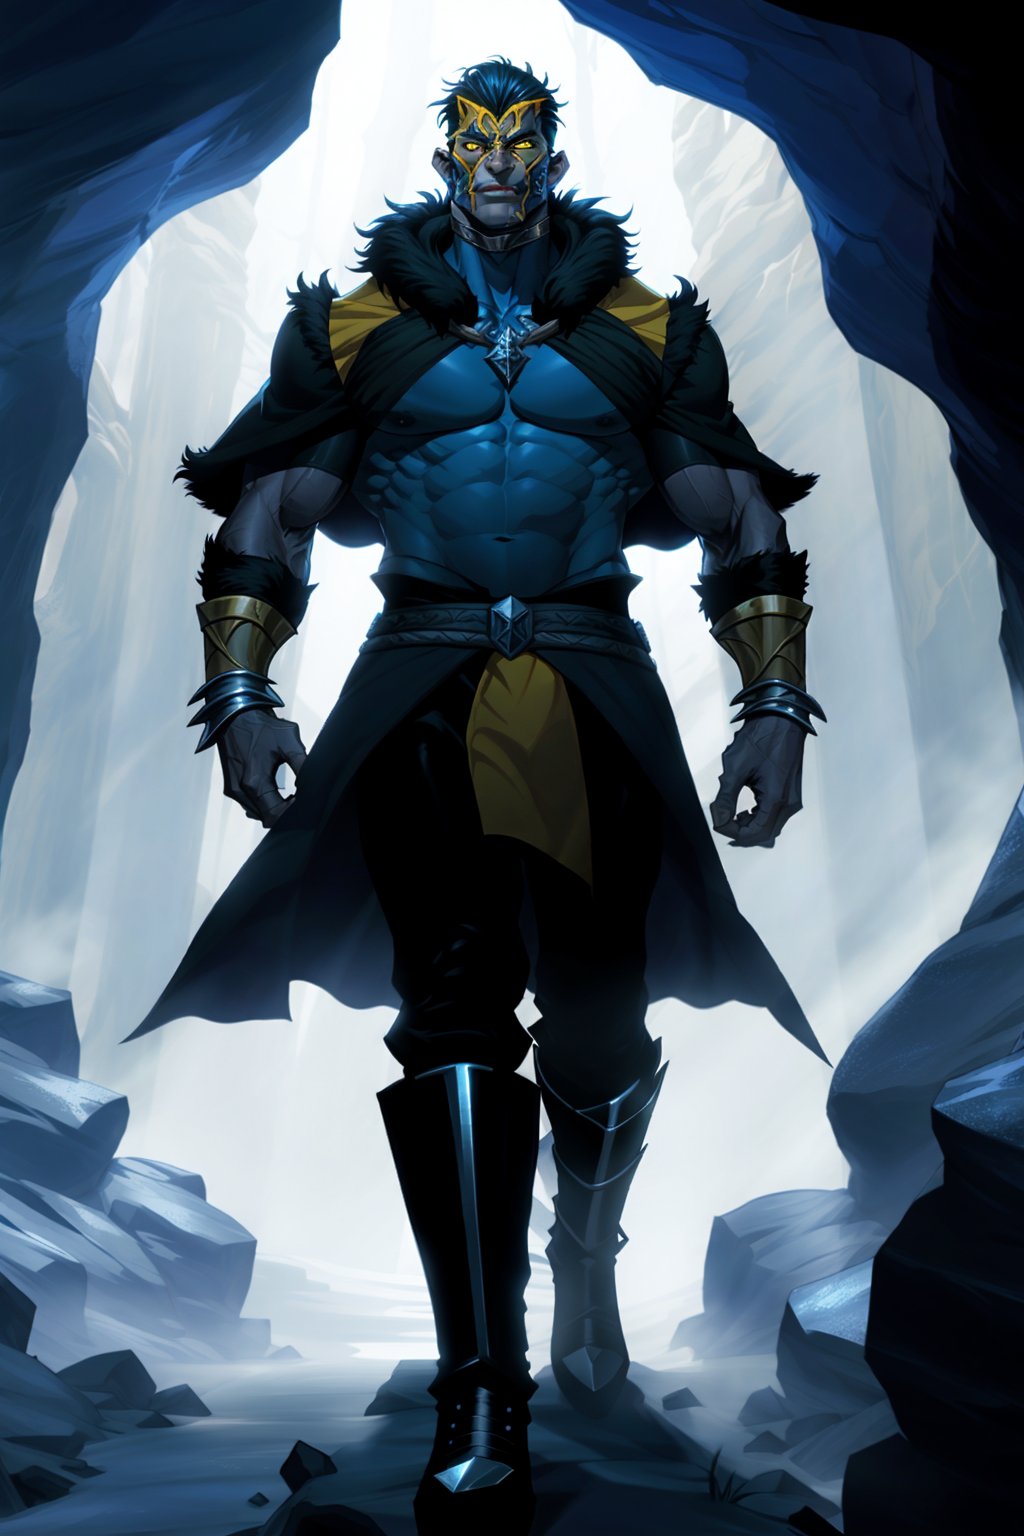 A powerful overlord emerges from the darkness of a cave, his strong physique and dark skin radiating an aura of authority. Poles of towering energy crackle around him as he walks into the light, his yellow furry cowl wrapped around his shoulders like a cloak of power. He wears white-powder chrome blue-black boots with black fur around the top and silver chrome arm bracelets, has fade close hair cut . The air is a blaze with anticipation as he, steps forth, ready to claim his dominance.